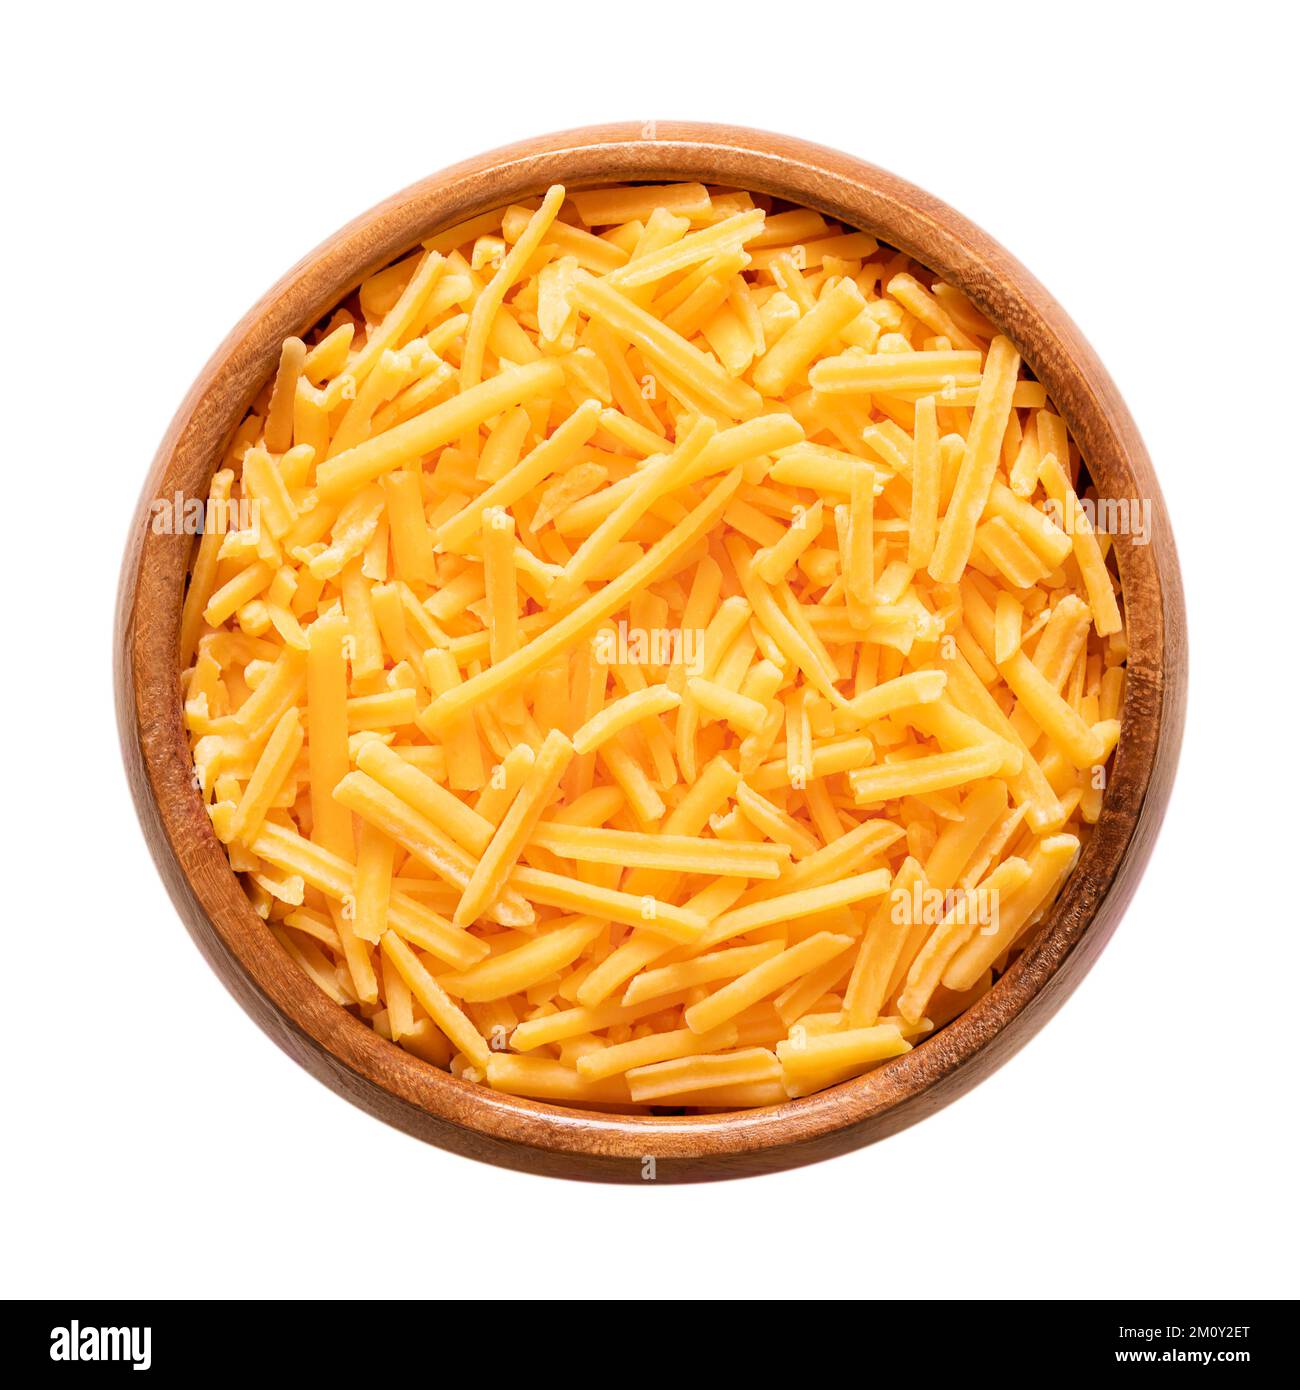 Shredded cheddar cheese, in a wooden bowl. Grated natural cheese, piquant, colored orange with annatto, a natural food coloring. Stock Photo